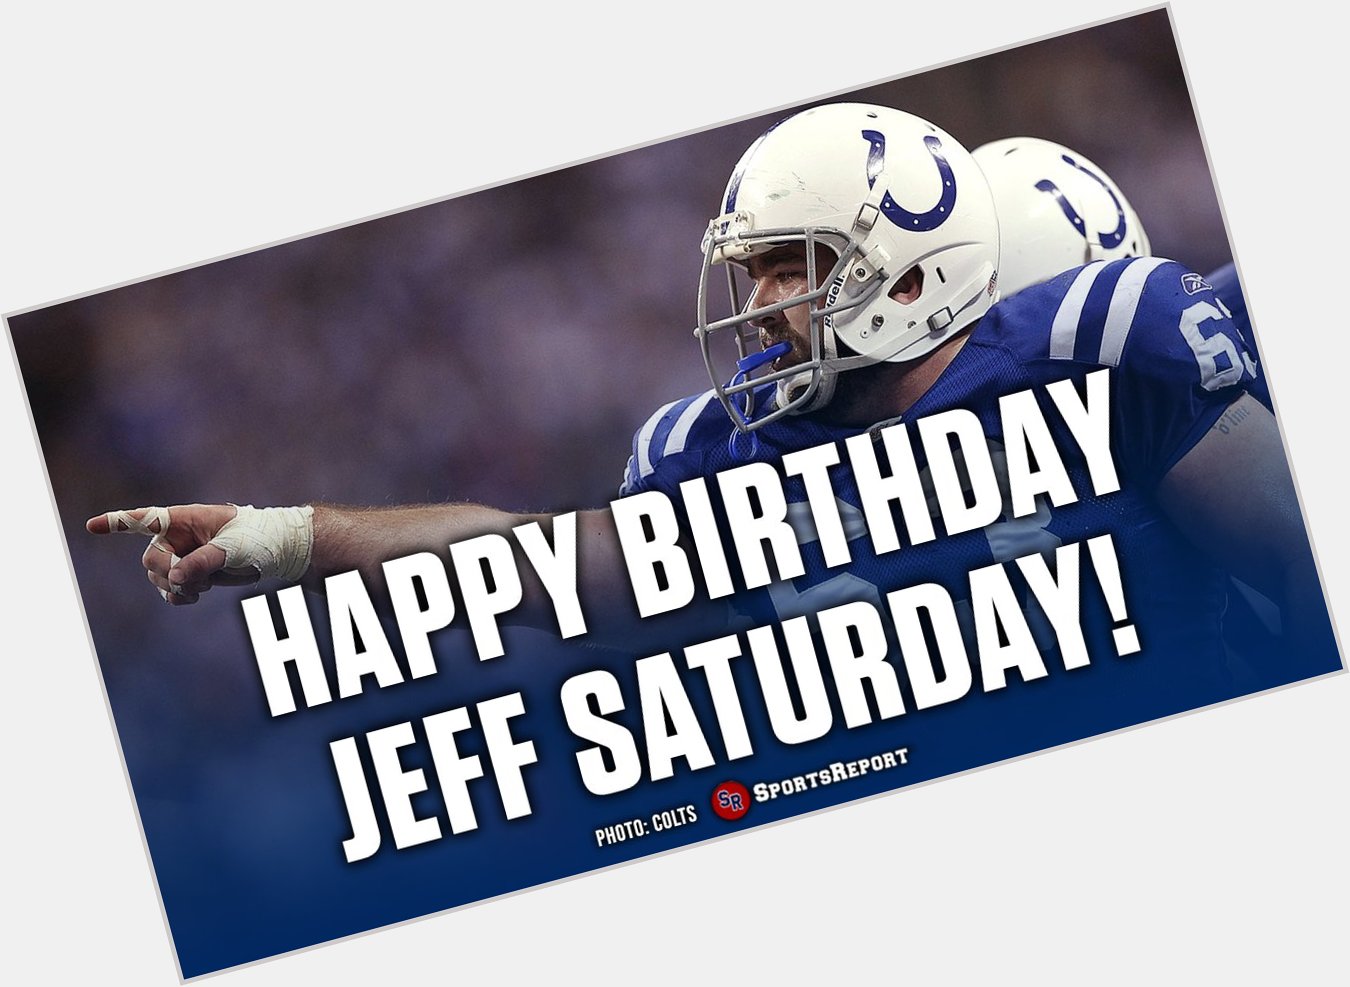  Fans, let\s wish legend Jeff Saturday a Happy Birthday! GO COLTS!! 